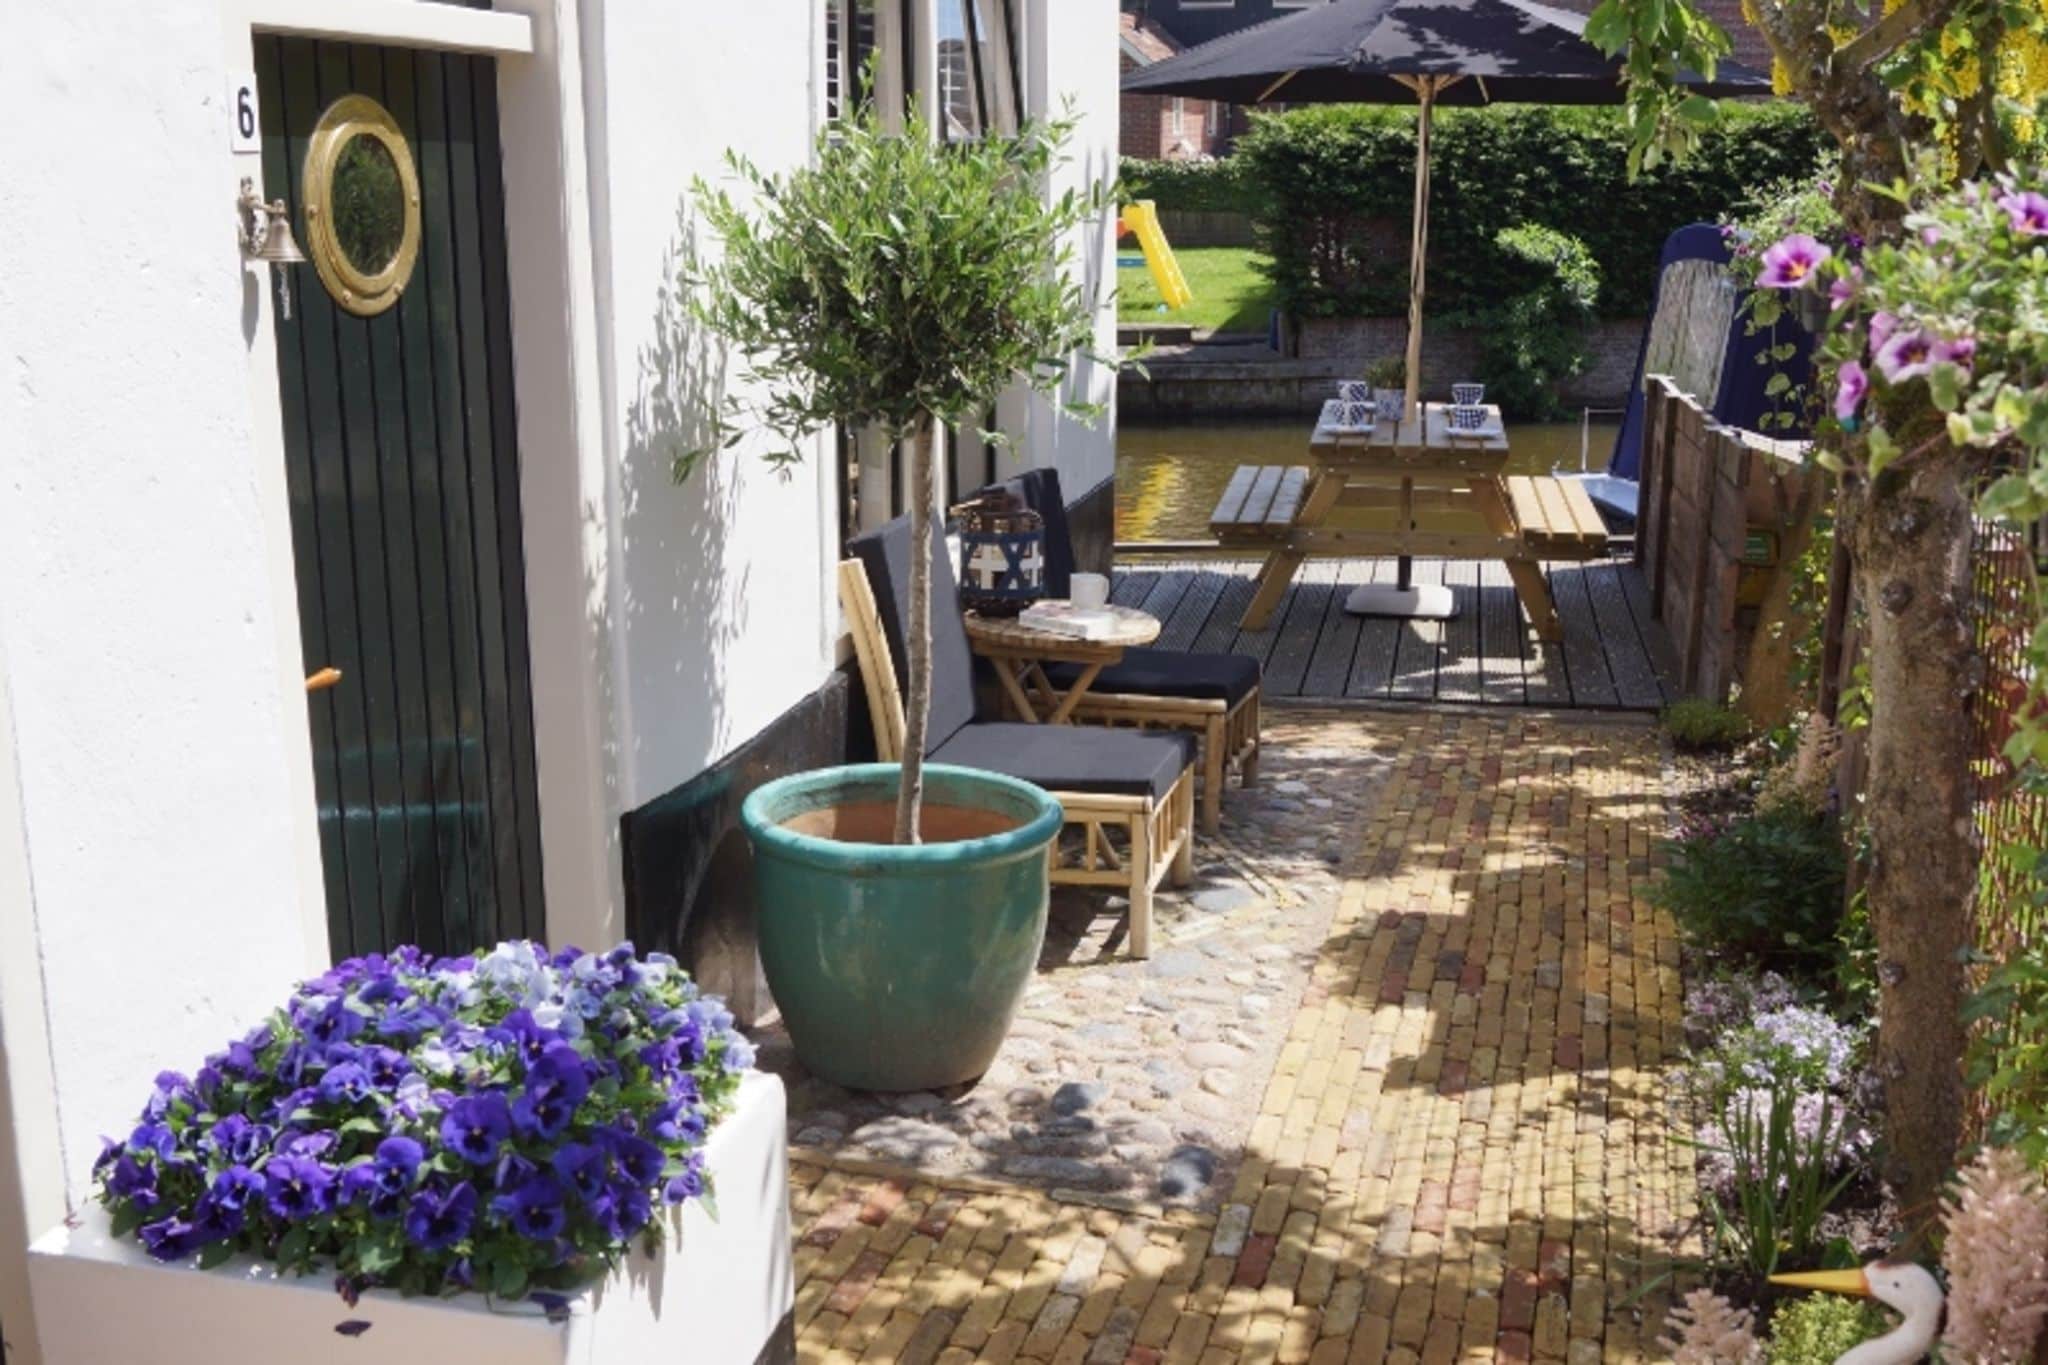 Lovely holiday home in Hindeloopen in a great setting, on the 11 city tour route